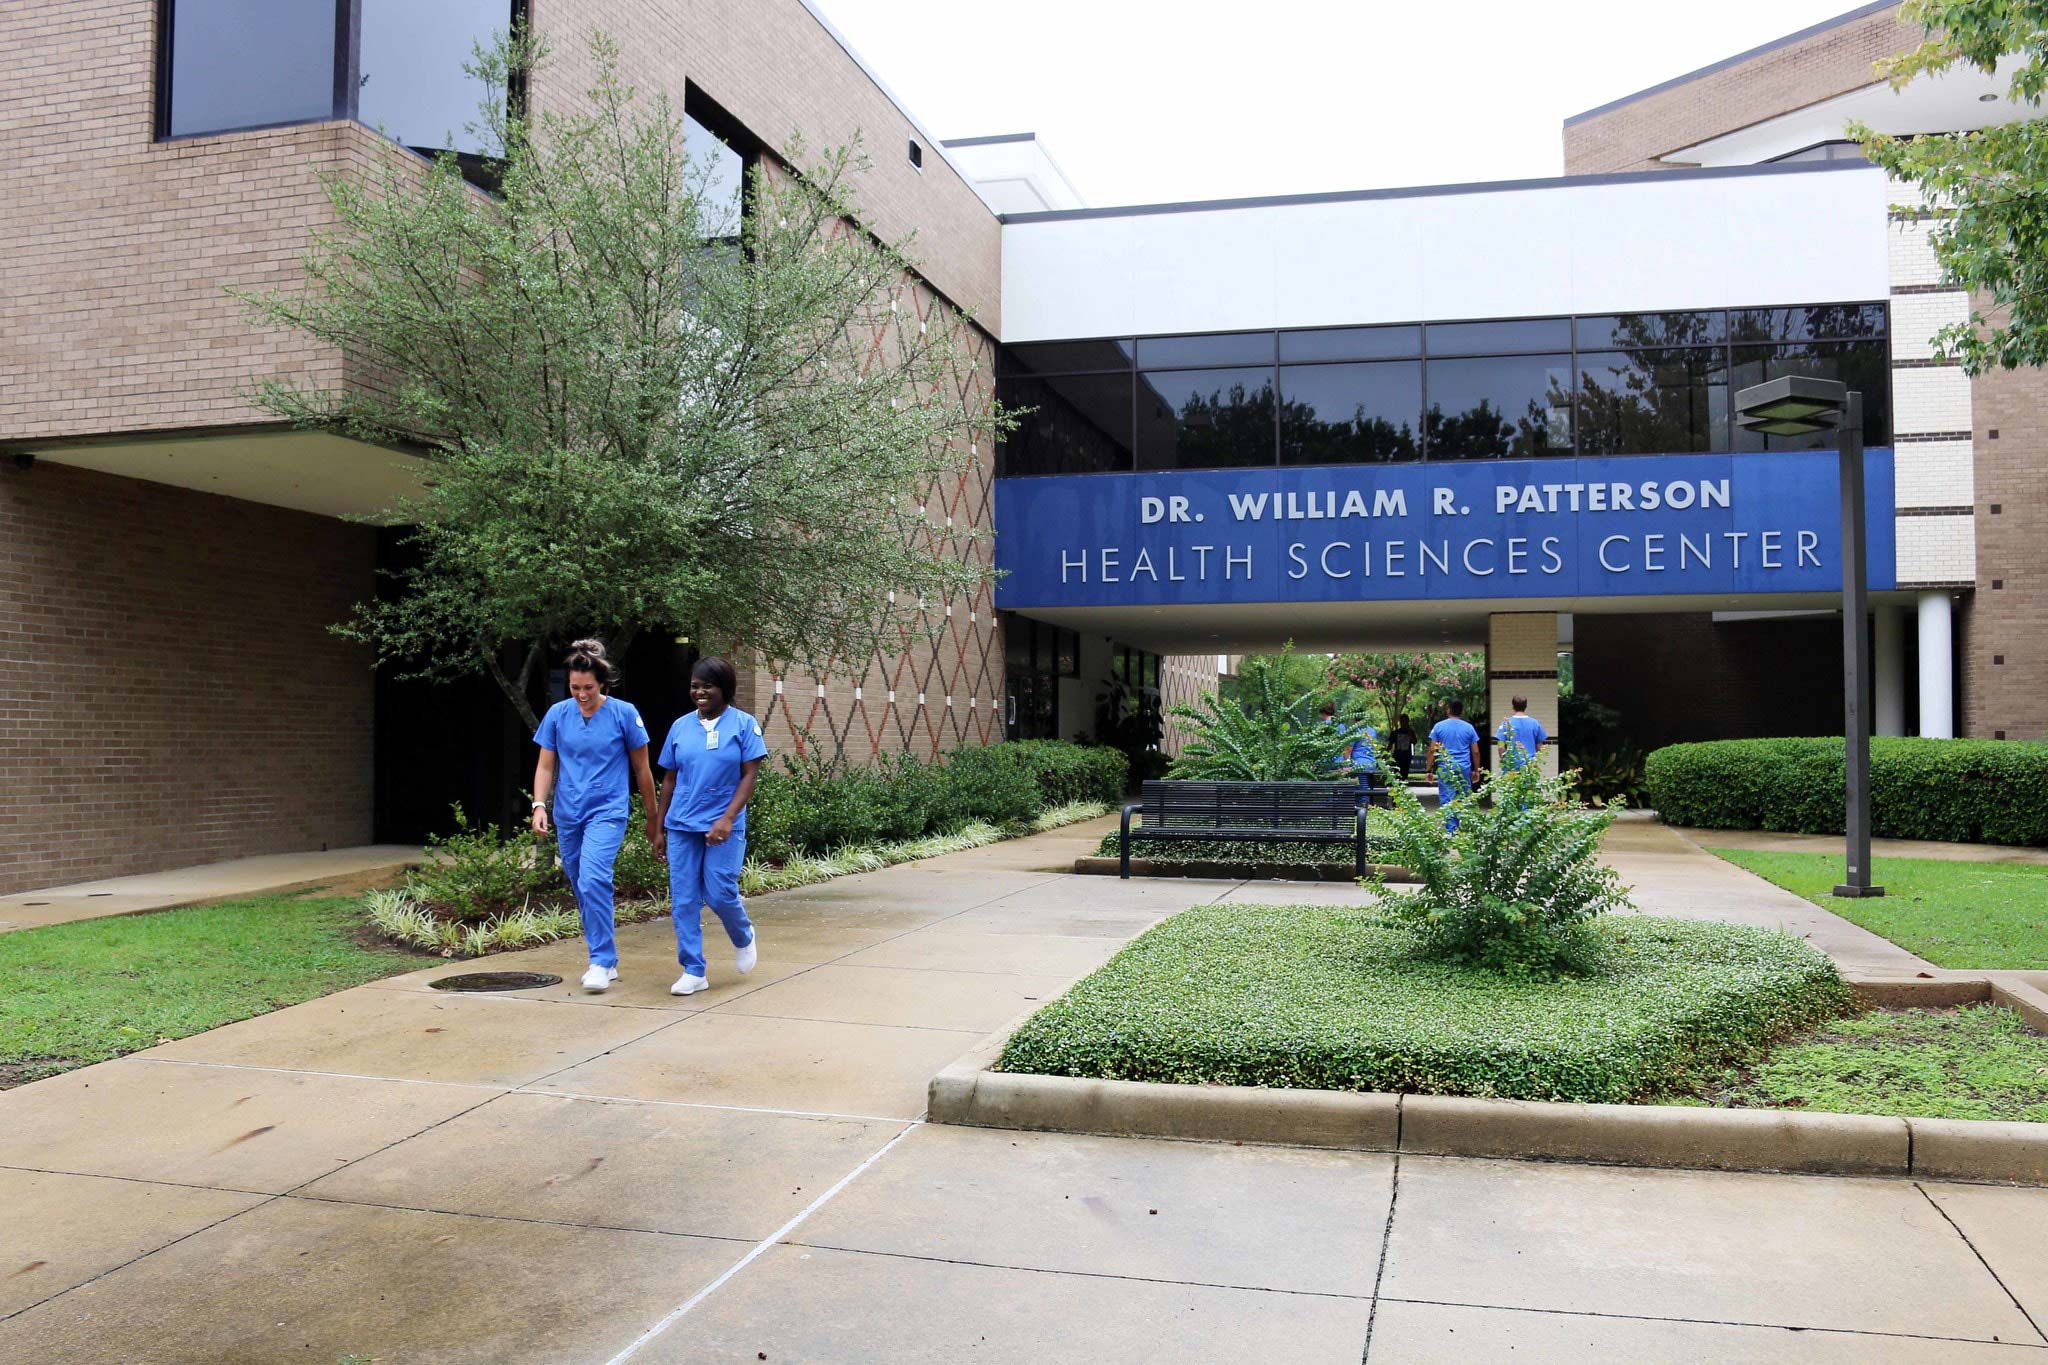 Dr. William R. Patterson Health Sciences Center at Texarkana College, a Texas community college